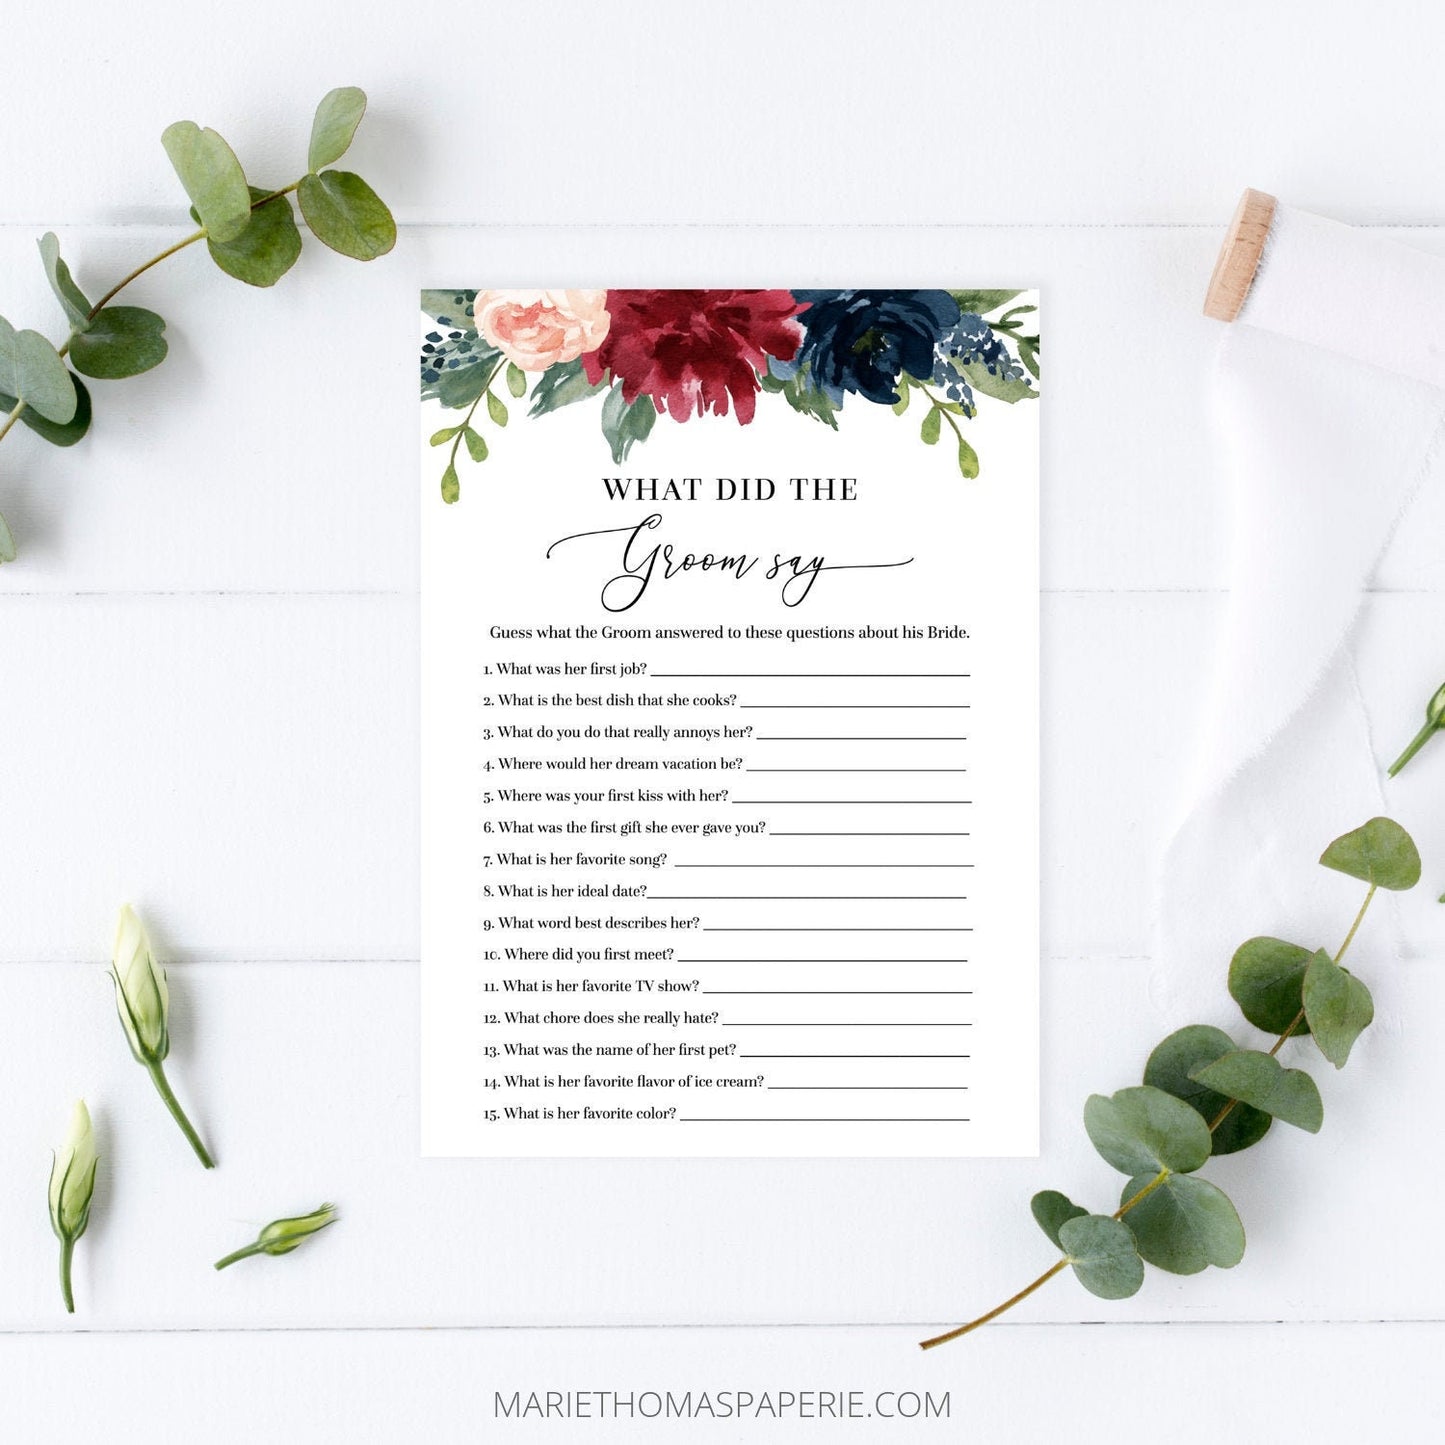 Editable What Did the Groom Say Bridal Shower Games Floral Burgundy Template